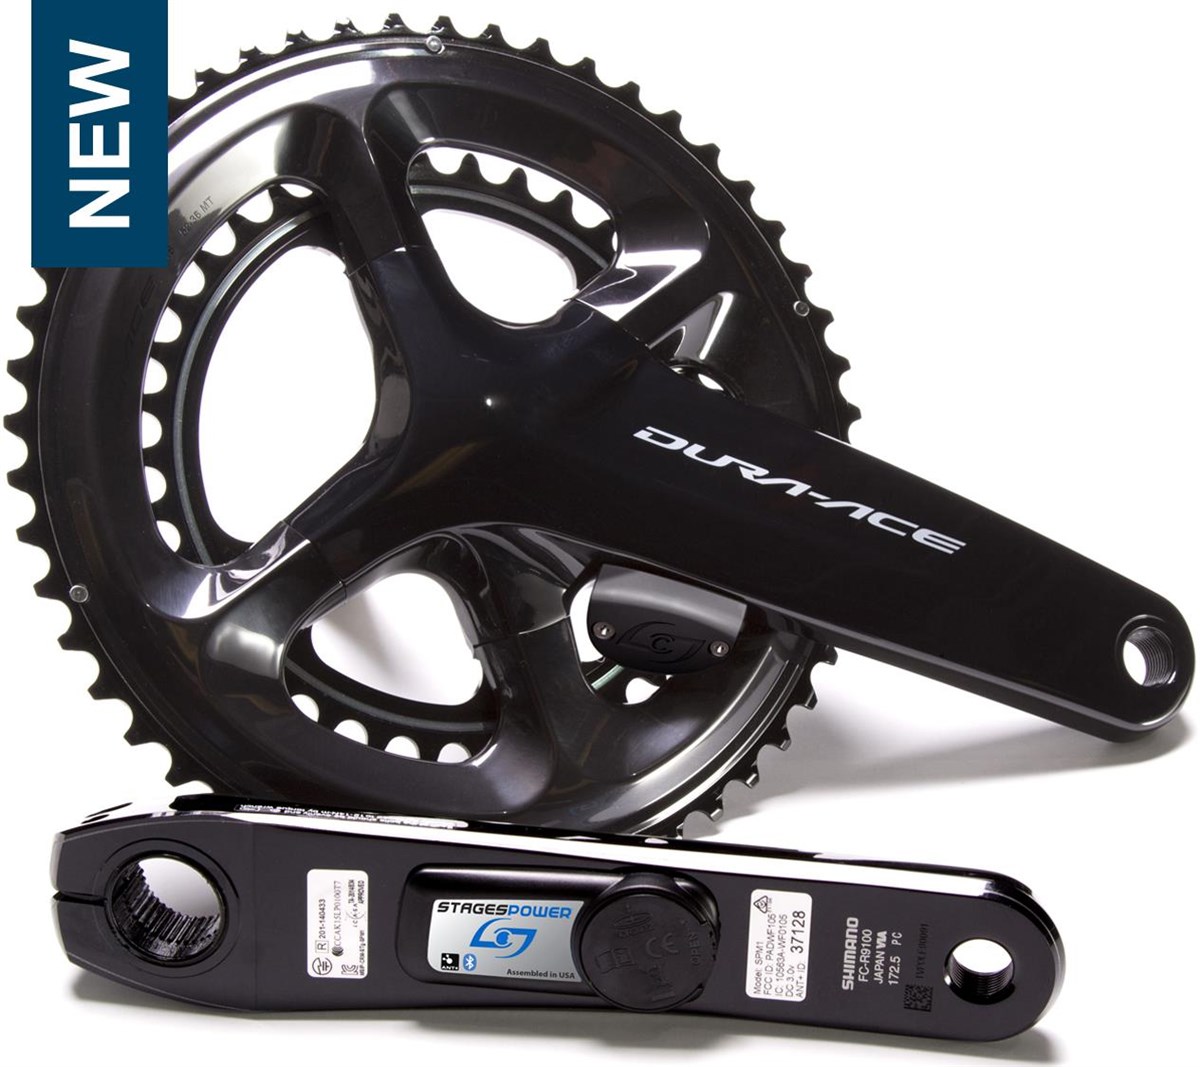 Stages Cycling Power Meter Dura-Ace R9100 LR product image